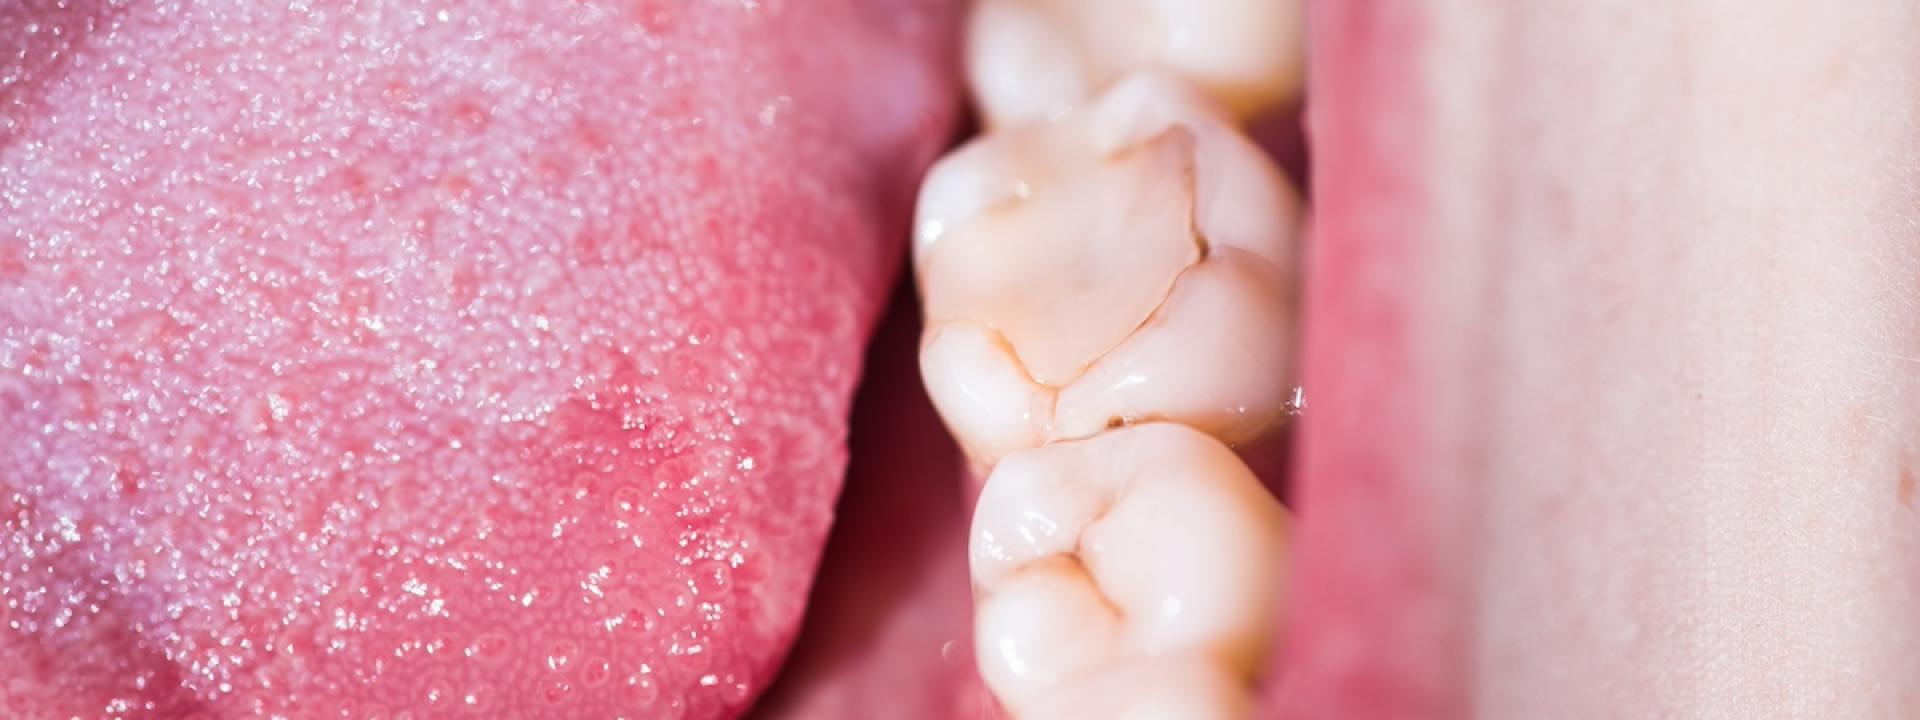 Signs that Your Dental Filling Is Going Bad